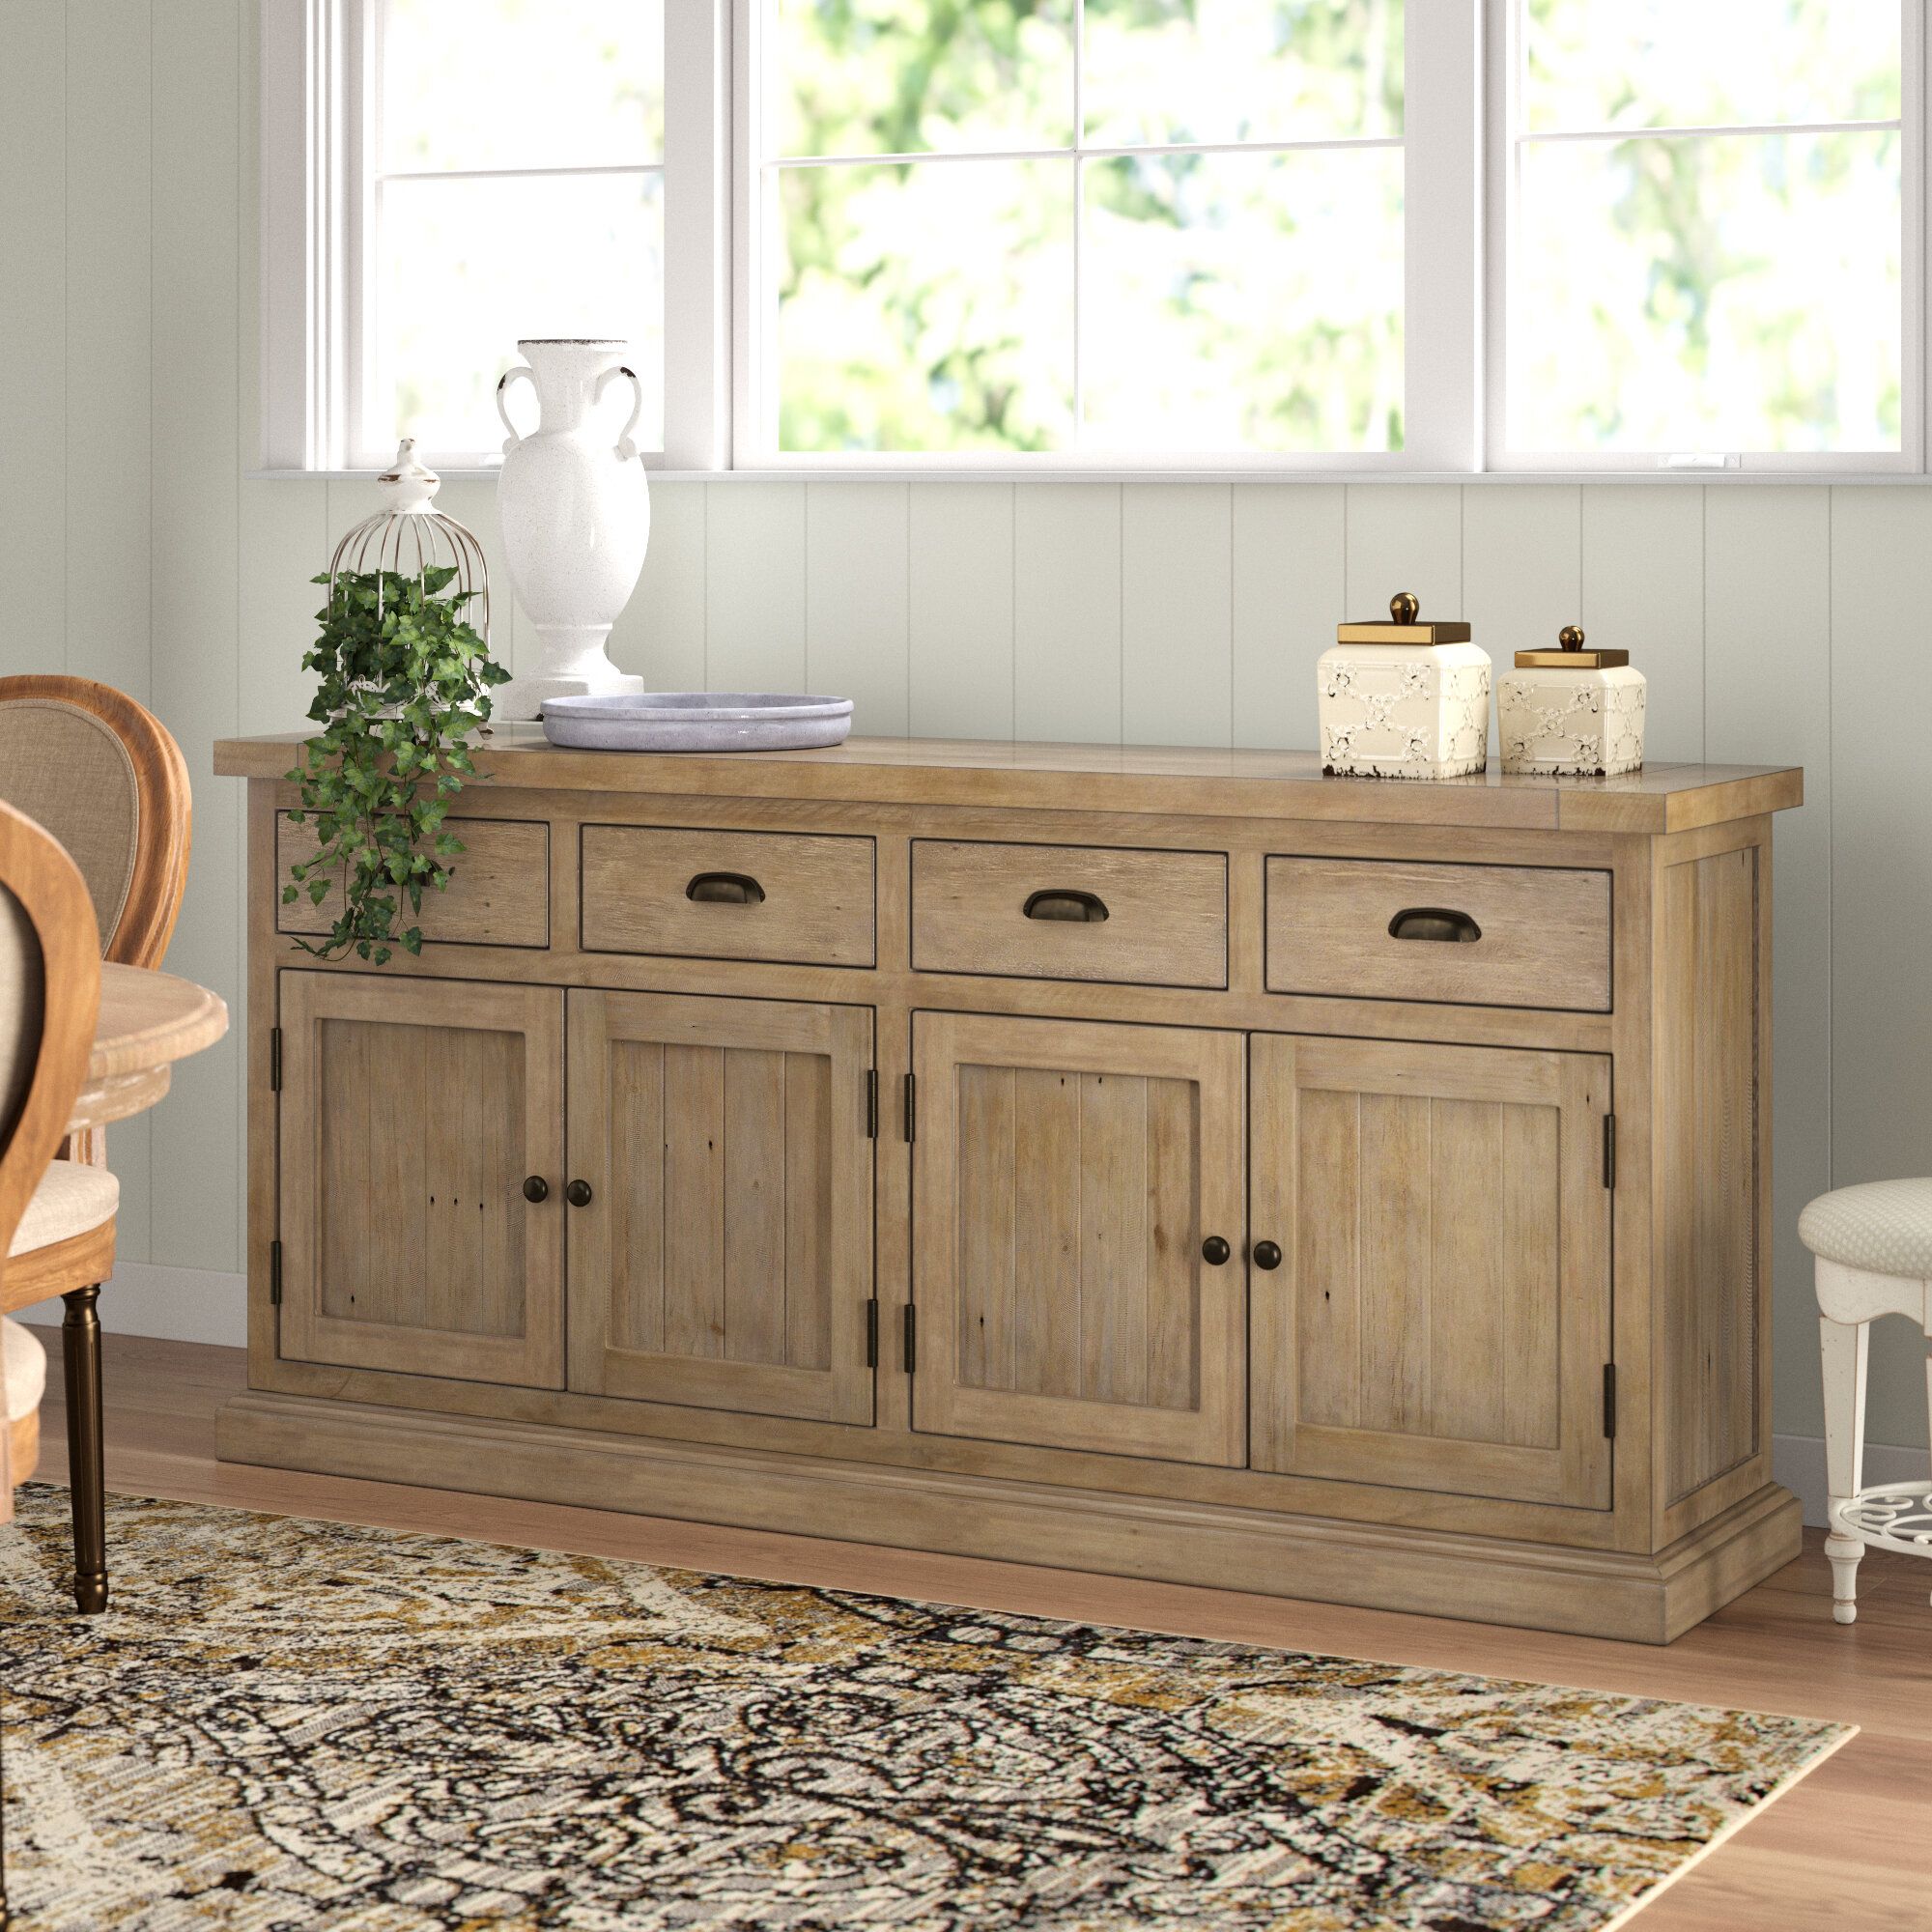 Drawer Equipped Sideboards & Buffets You'll Love In 2019 Throughout Most Current Joyner Sideboards (View 8 of 20)